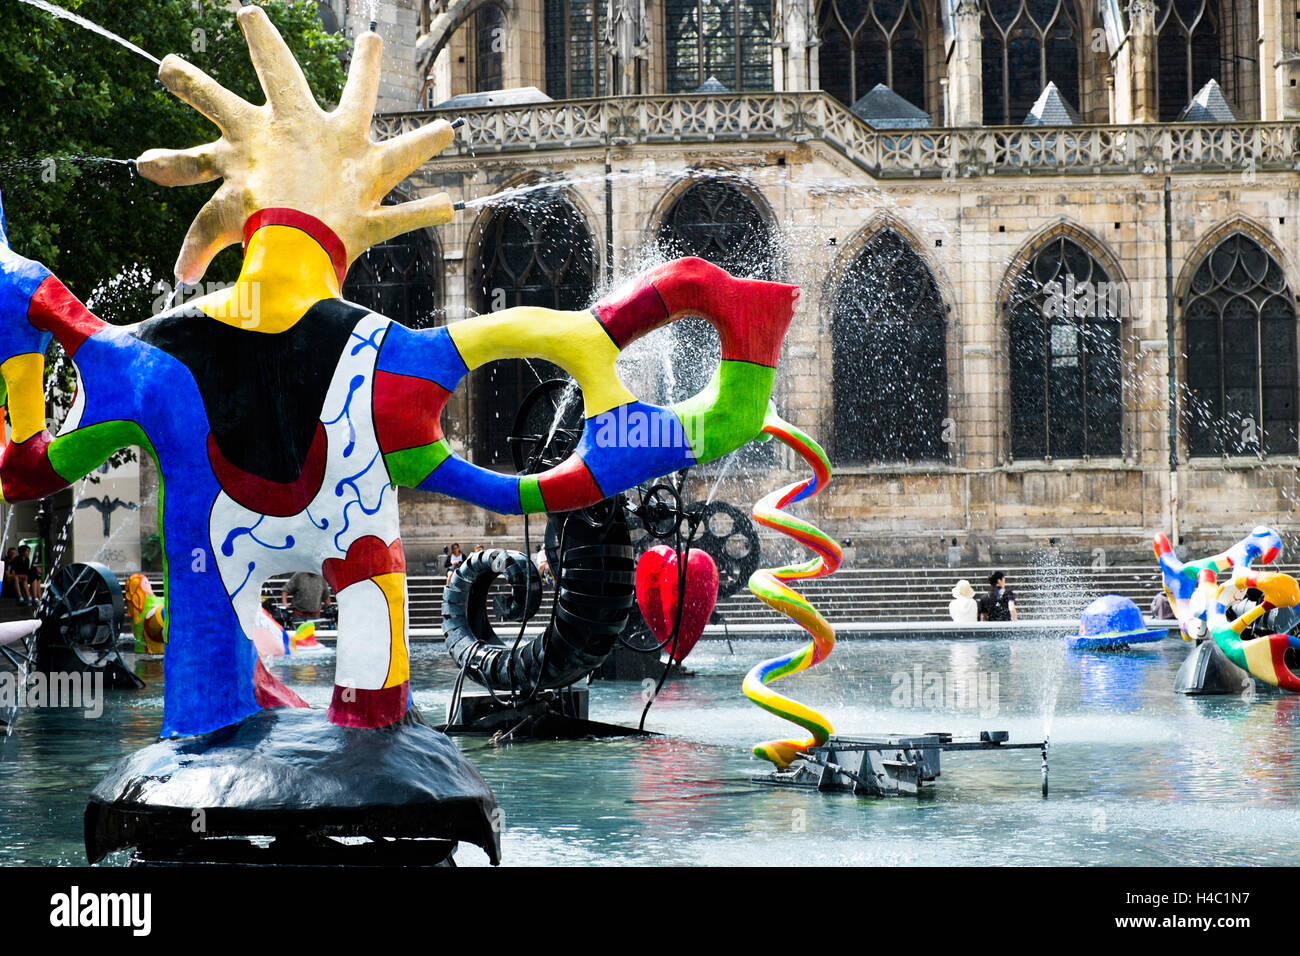 Stravinsky Fountain created in 1983 by sculptors Jean Tinguely and Jean Tinguely, located on Place Stravinsky, next to the Centre Pompidou, Paris, France Stock Photo